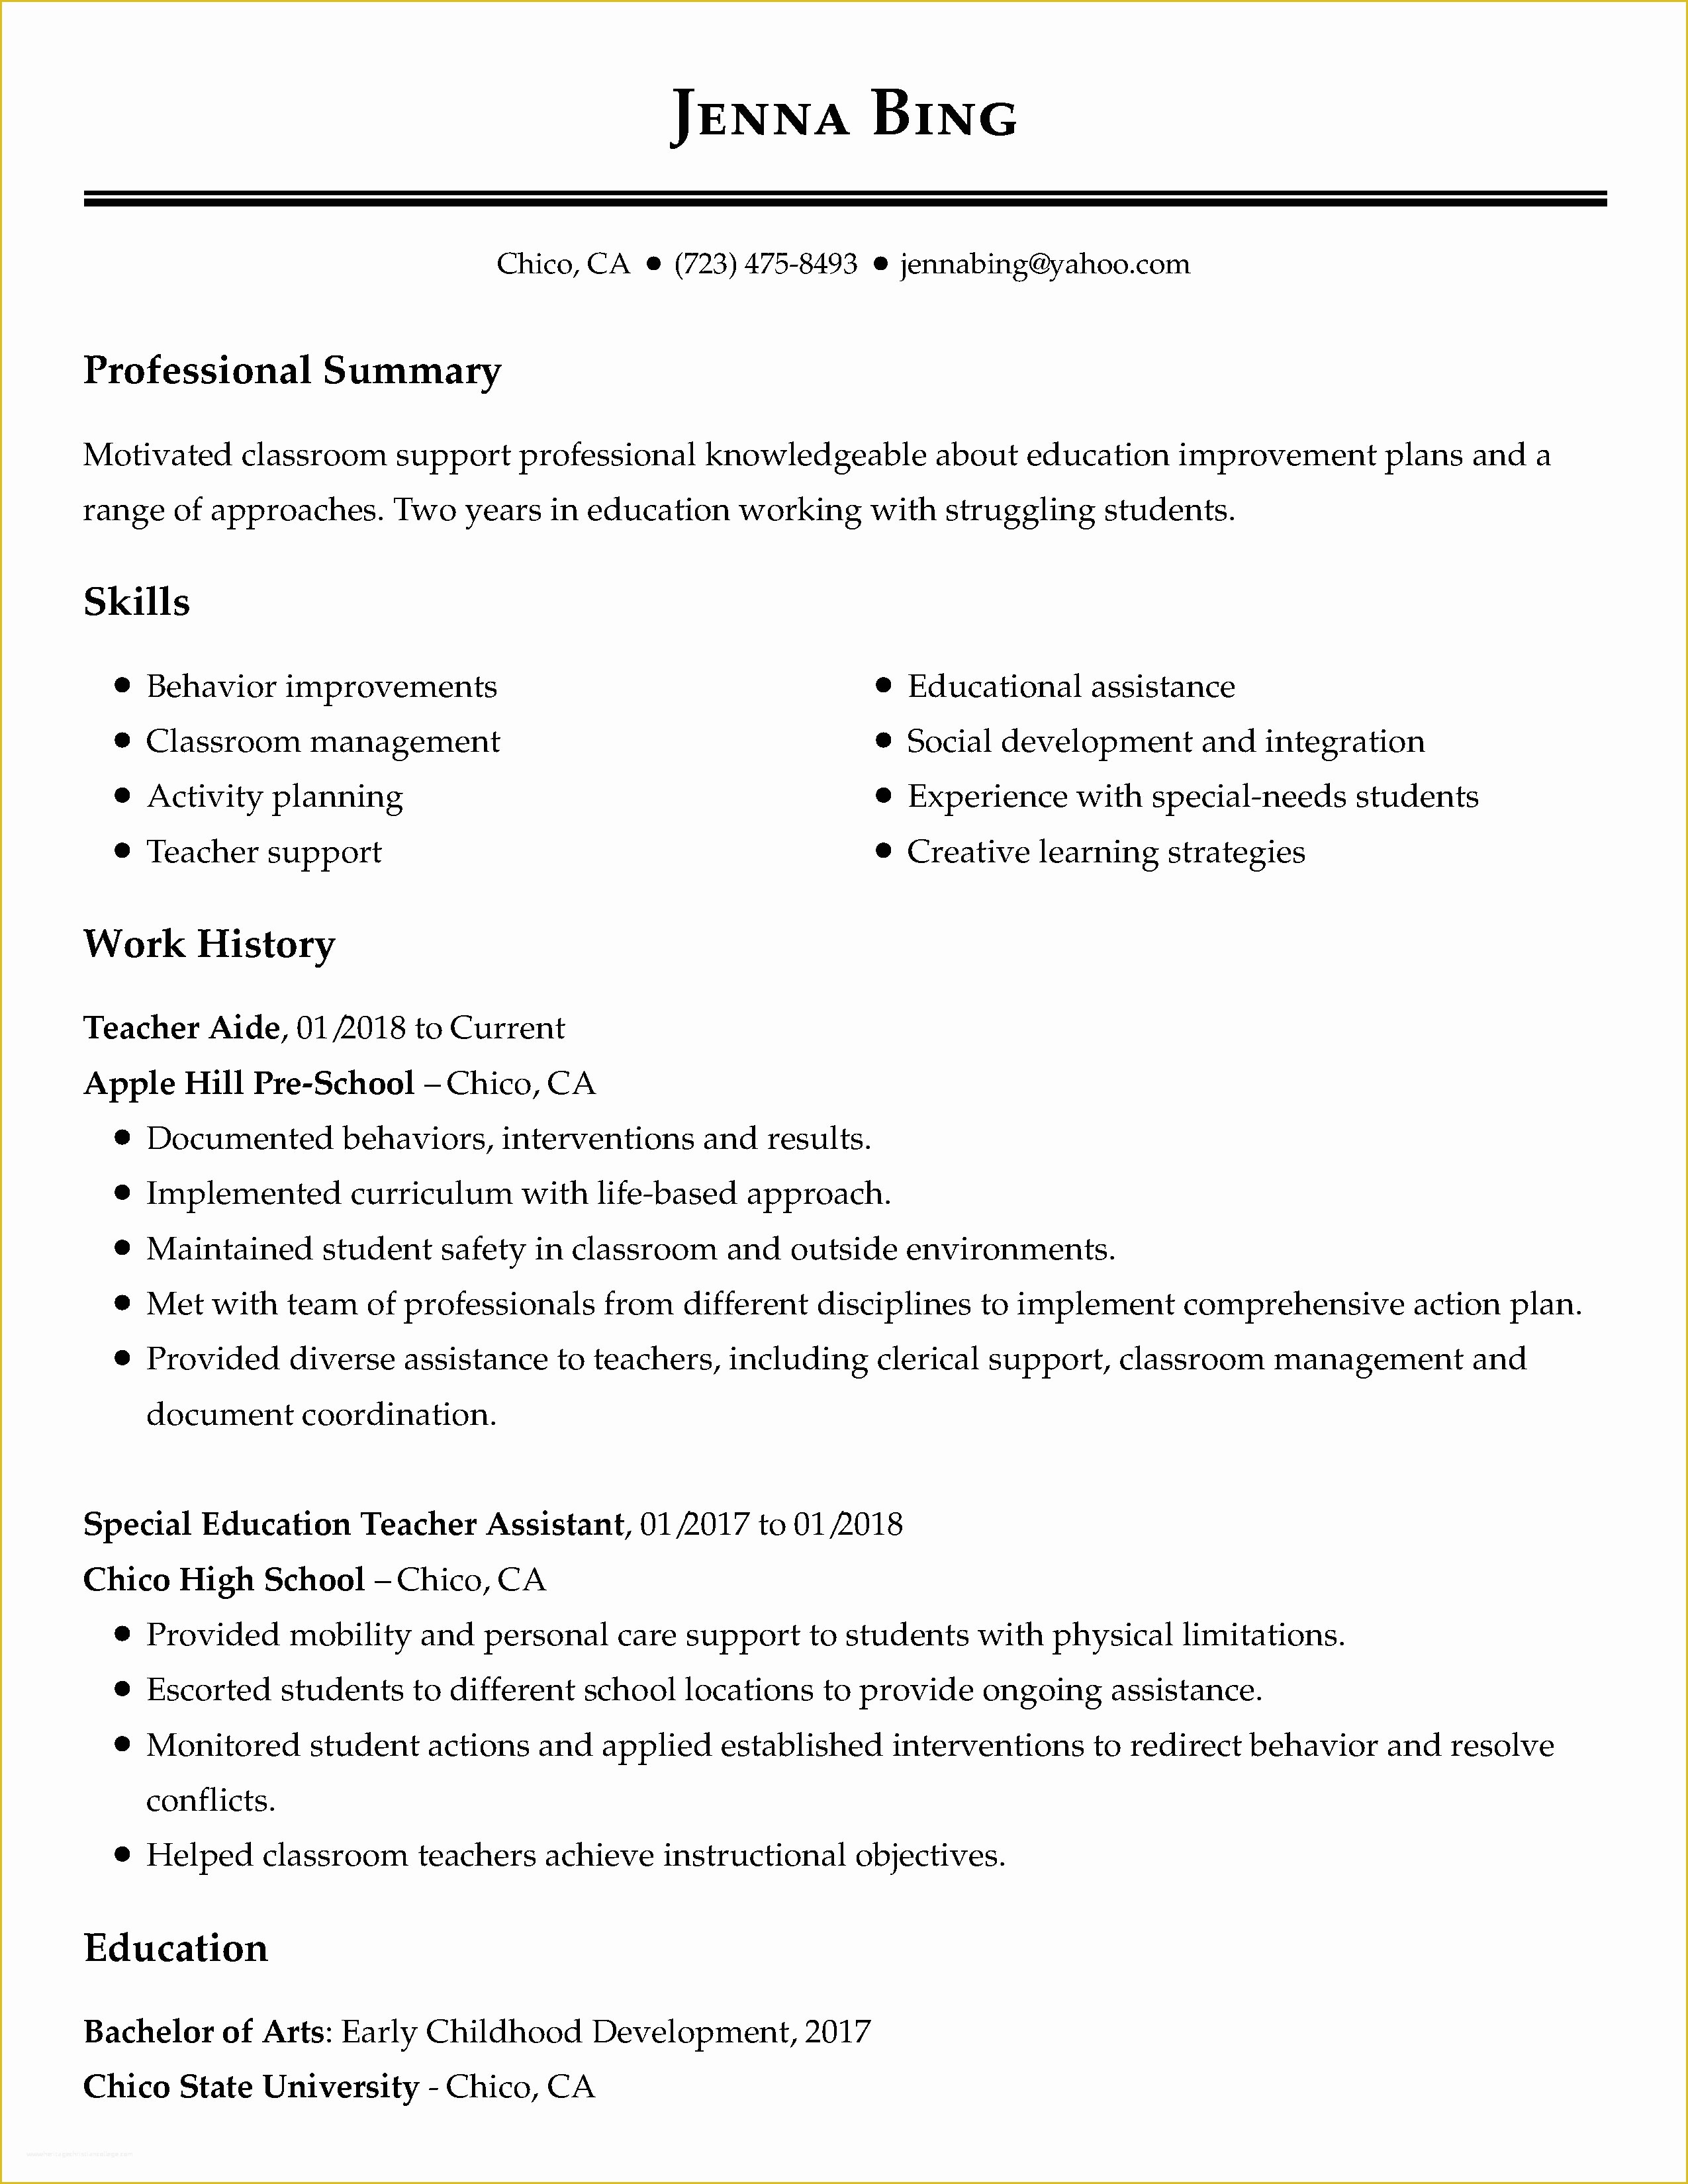 Free Job Specific Resume Templates Of View 30 Samples Of Resumes by Industry &amp; Experience Level